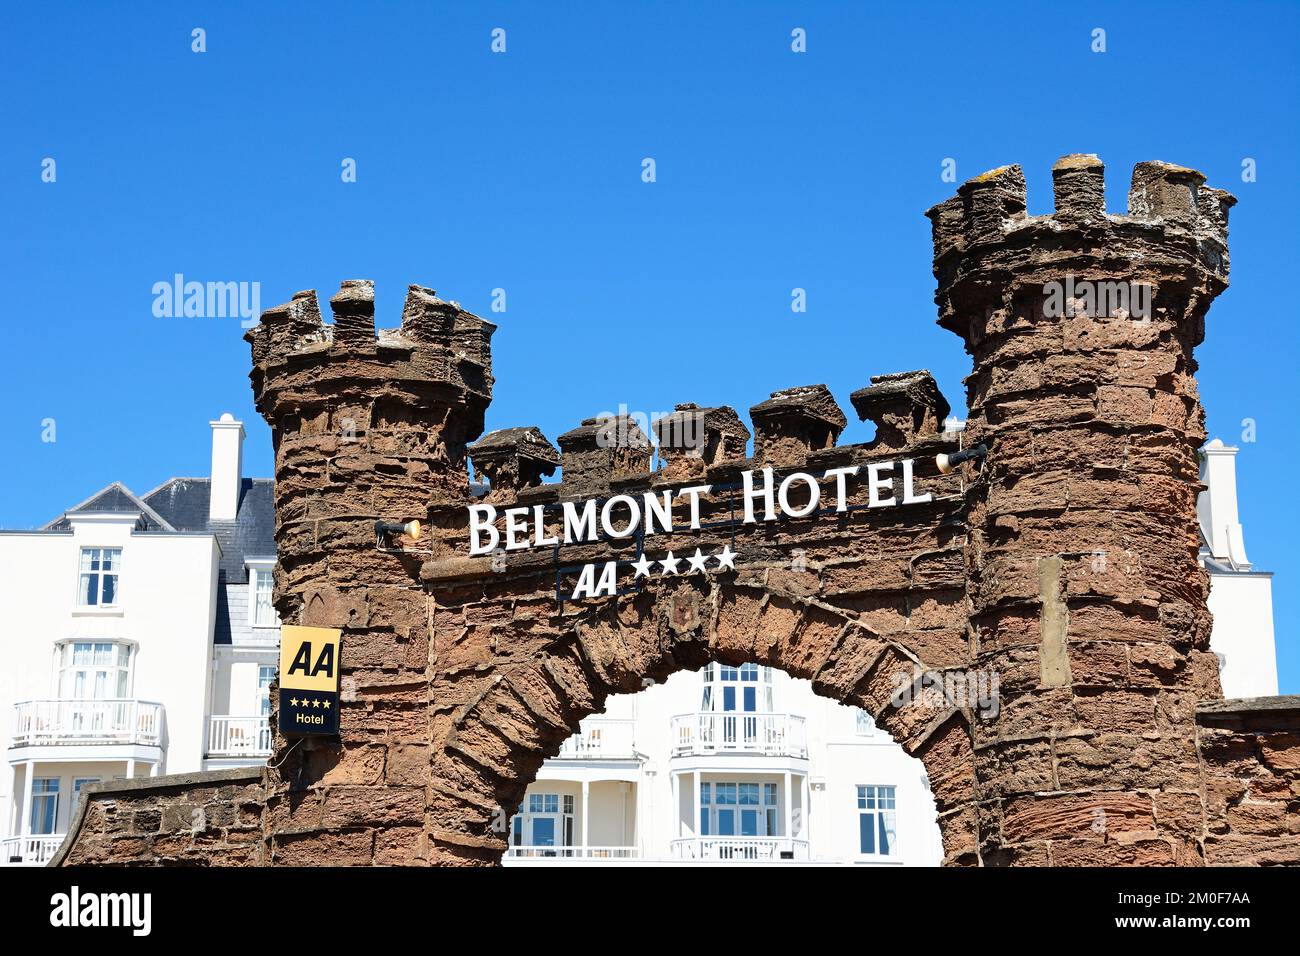 Entrance arch to the four star Belmont Hotel along the promenade, Sidmouth, Devon, UK, Europe. Stock Photo